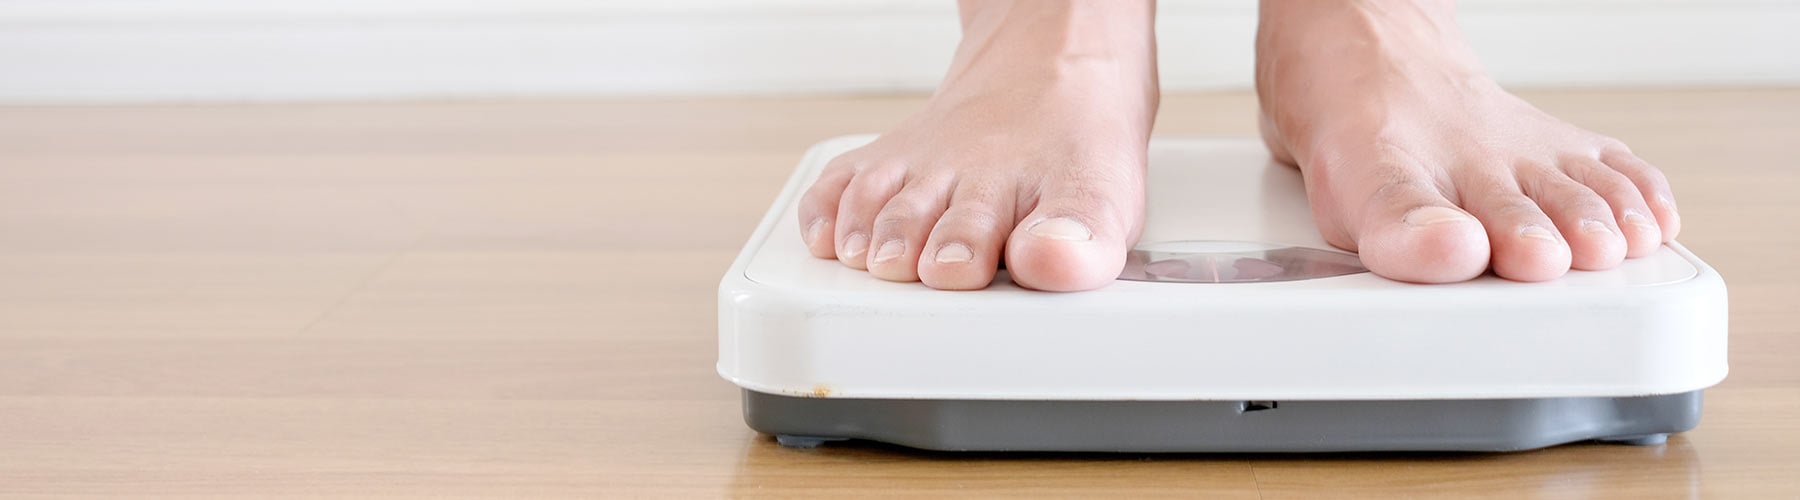 person standing on a scale after using medical weight loss treatment